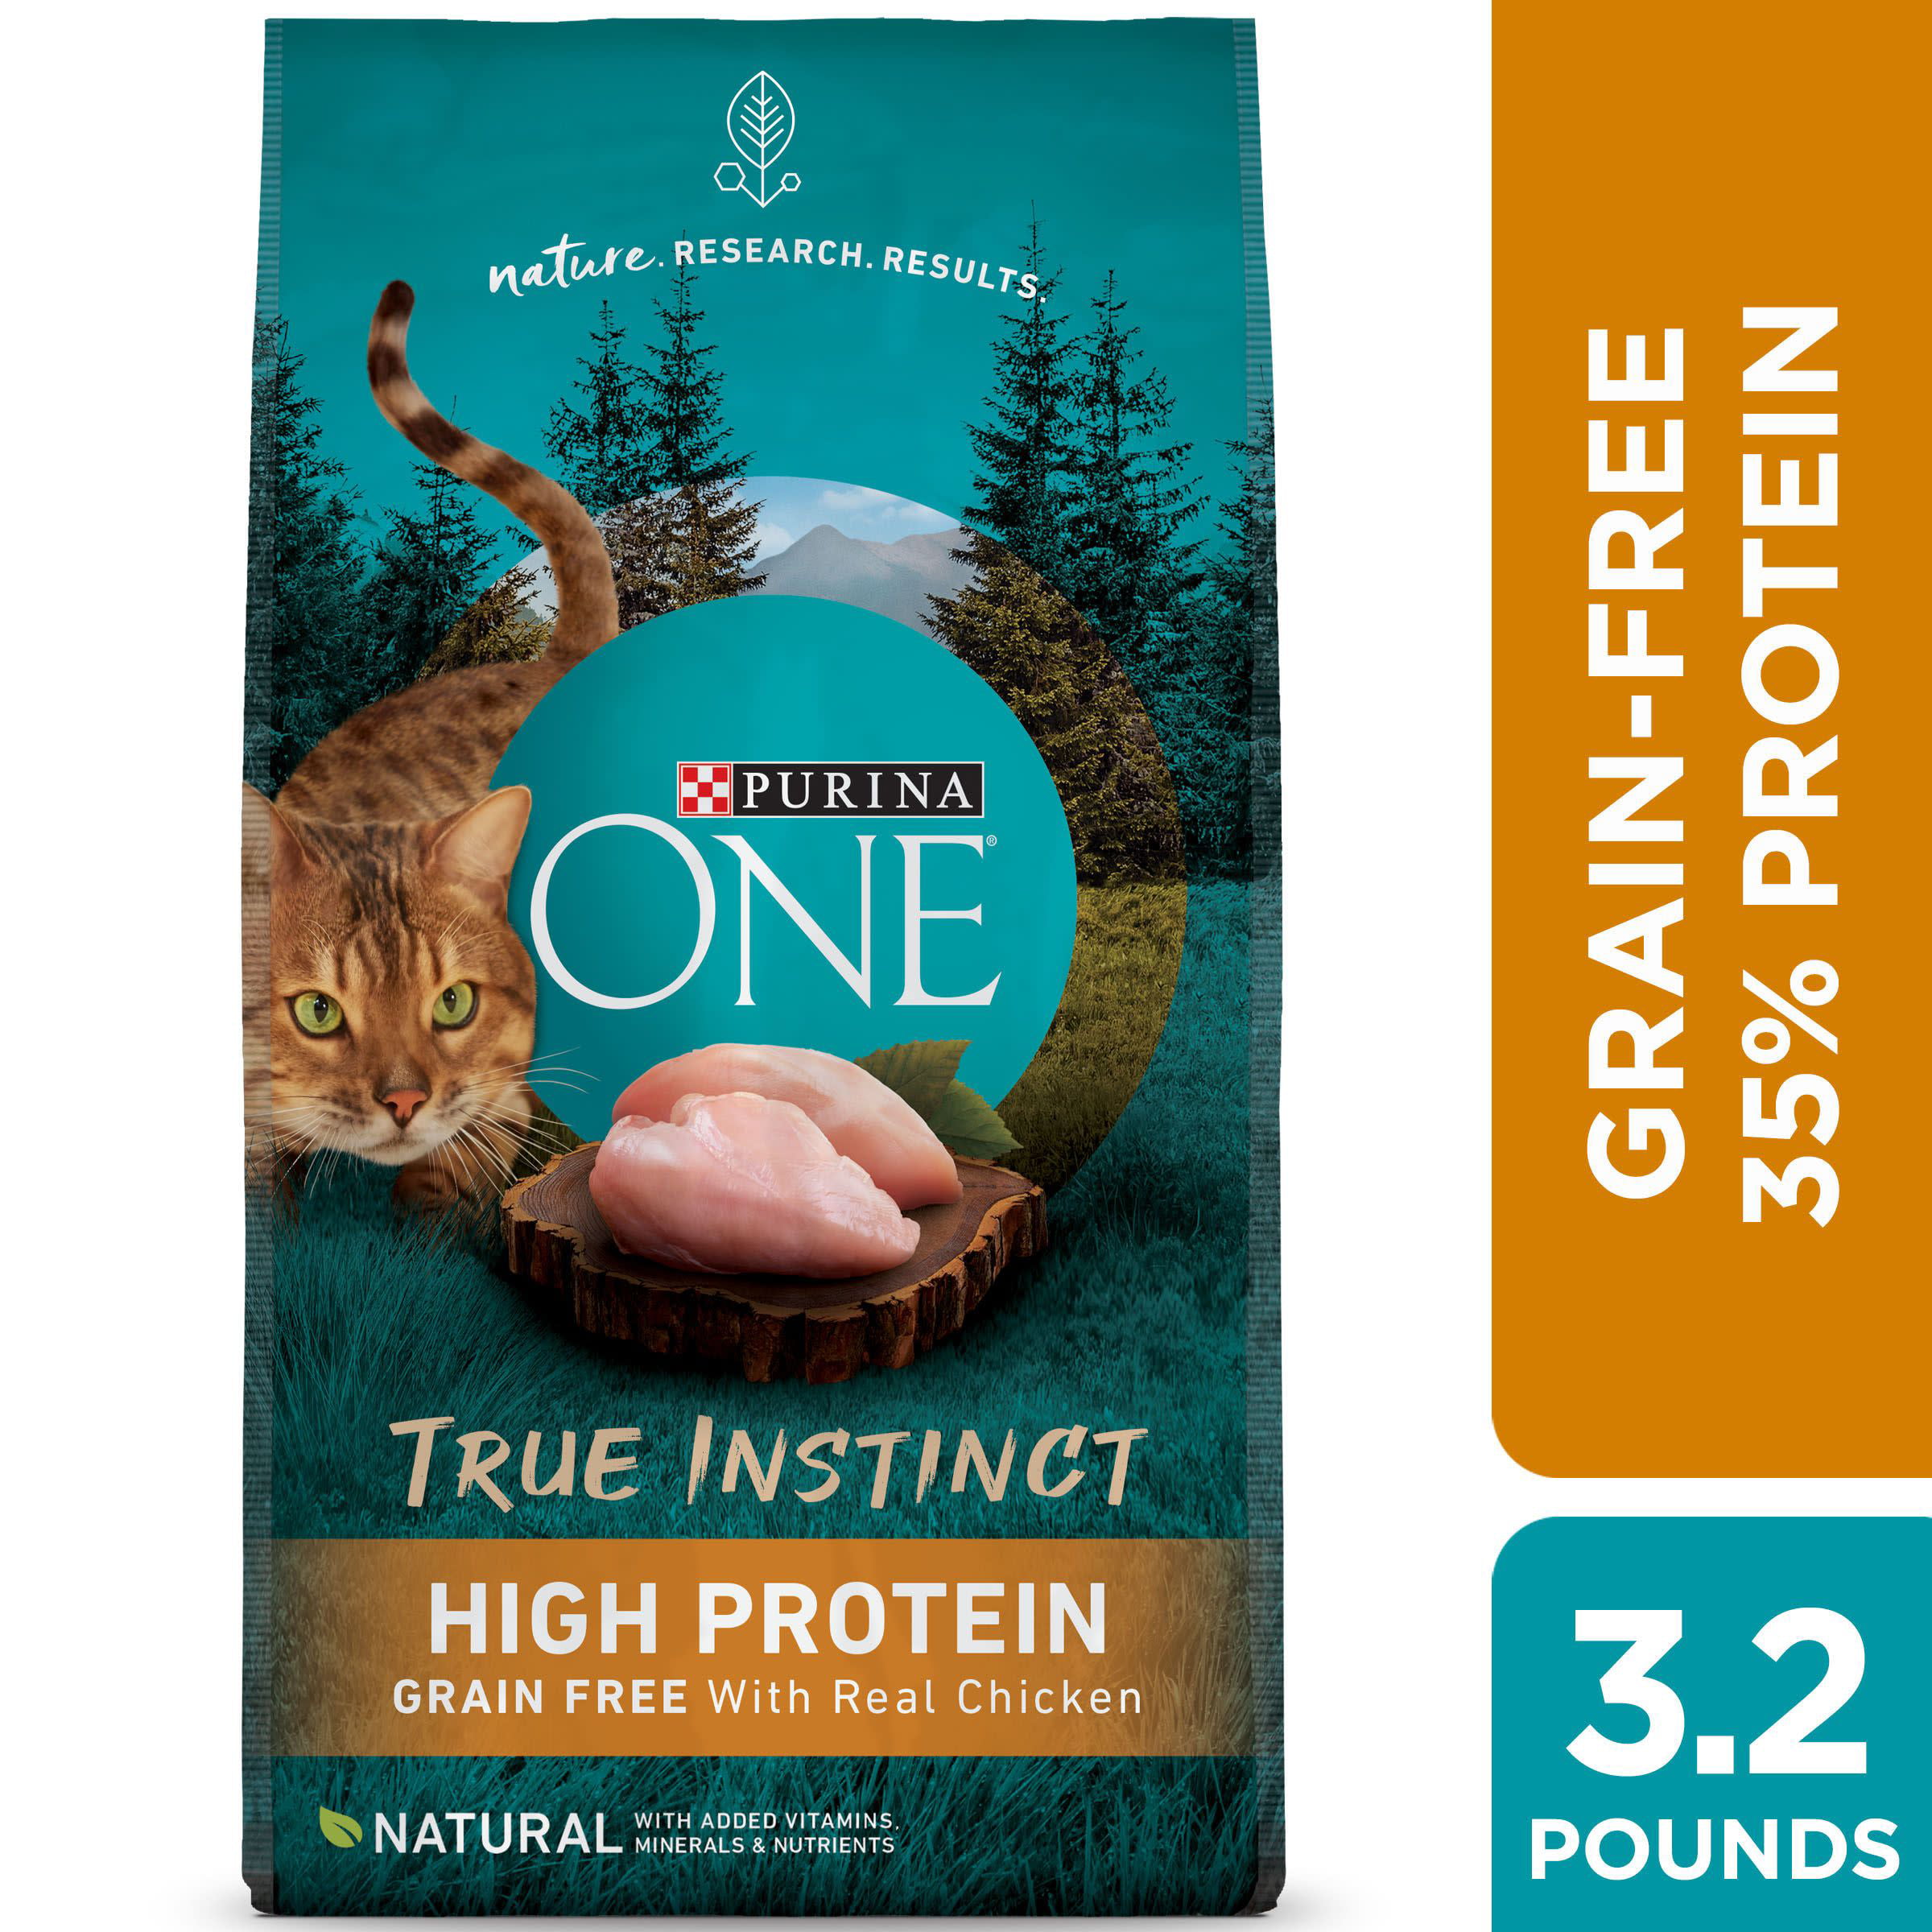 High quality protein cat food